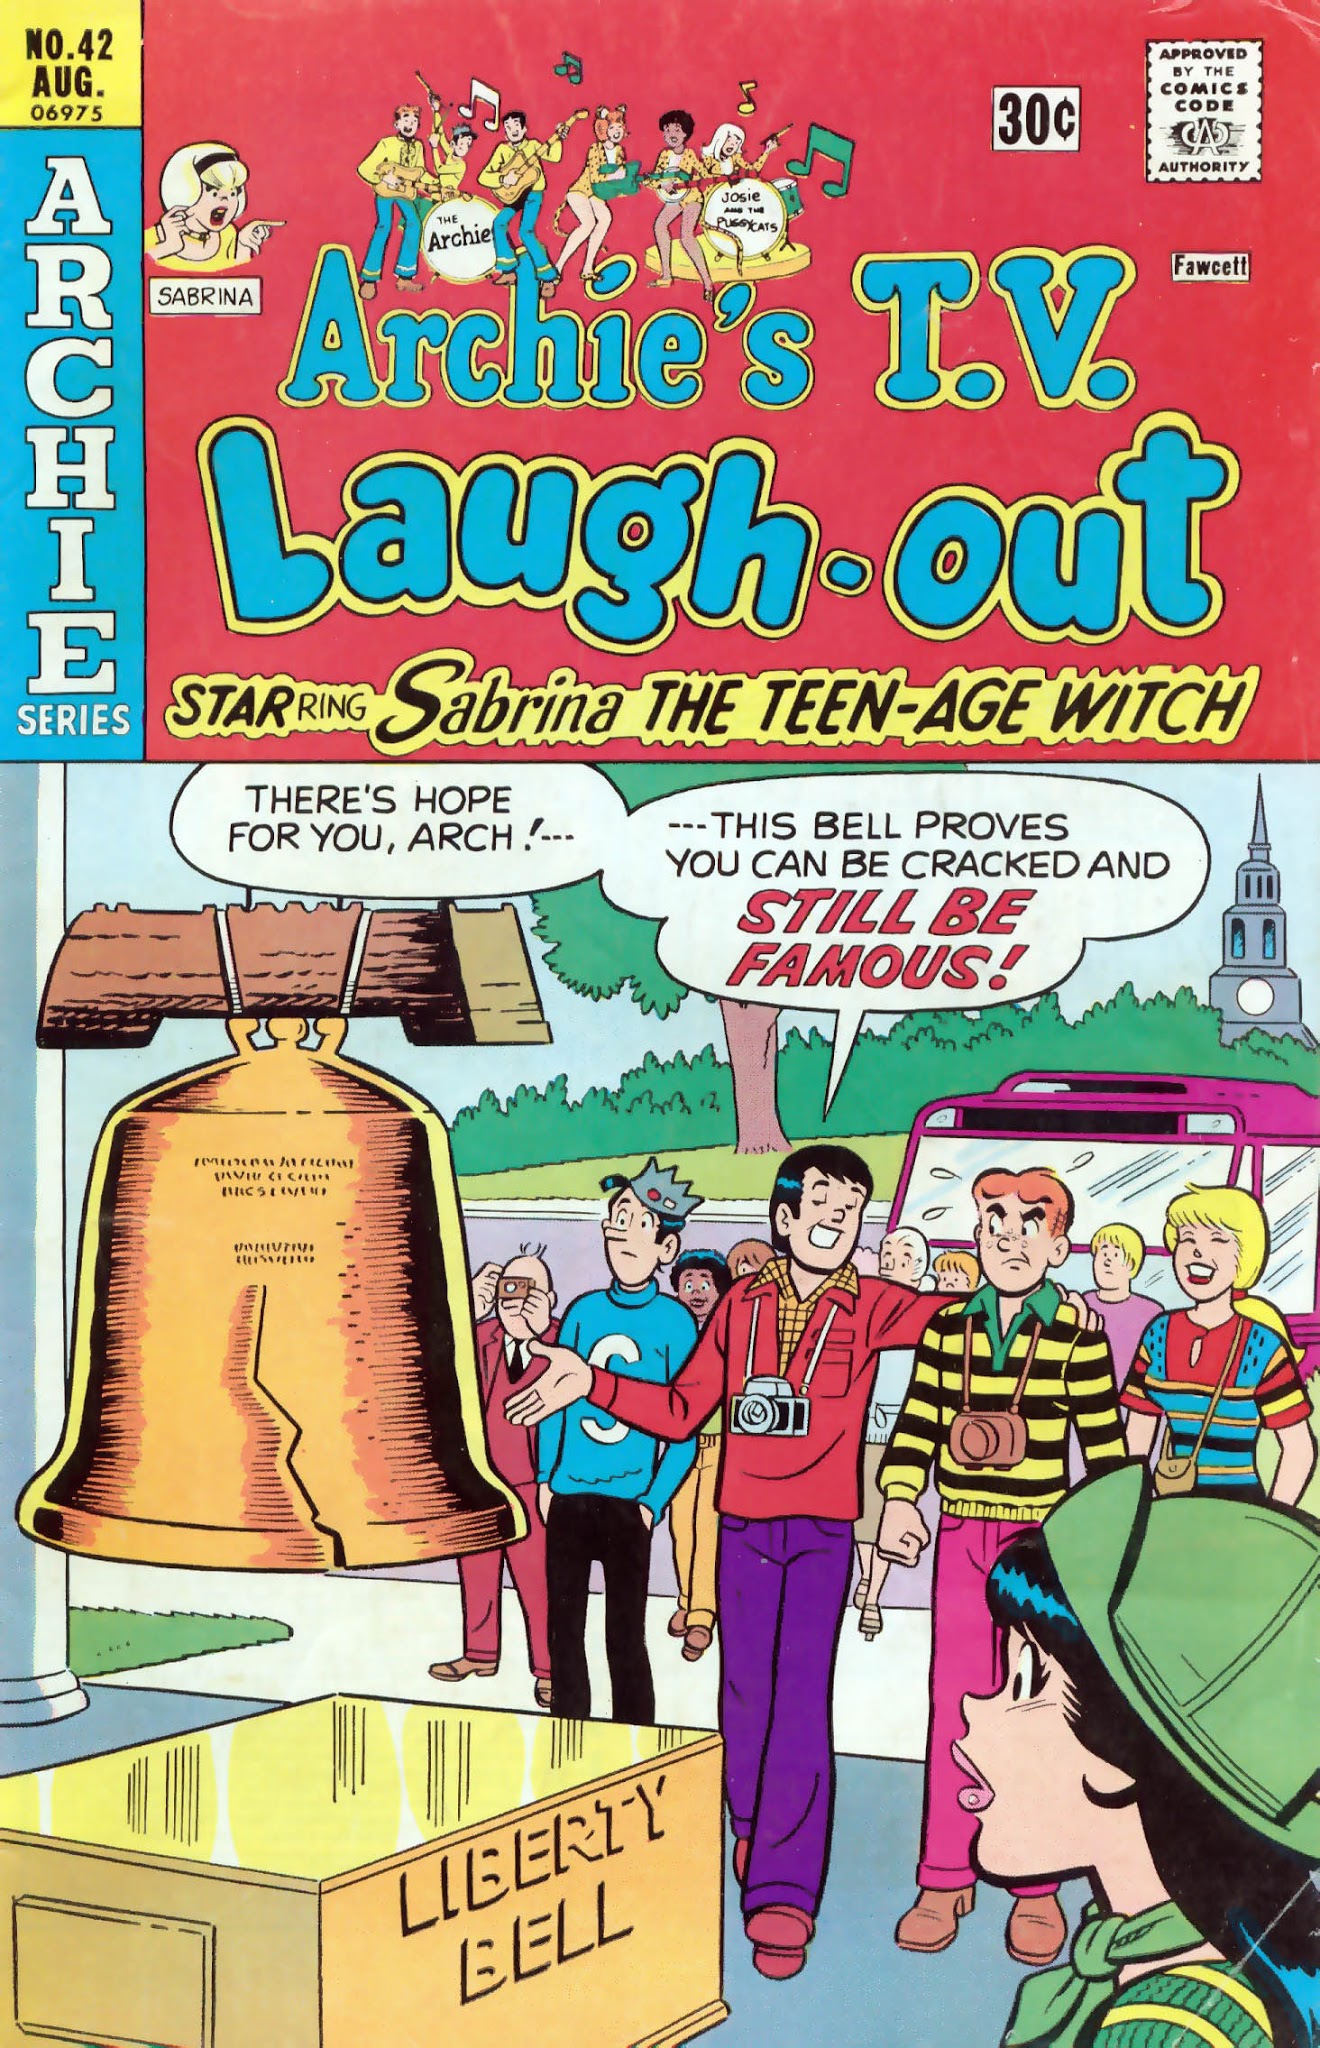 Read online Archie's TV Laugh-Out comic -  Issue #42 - 1